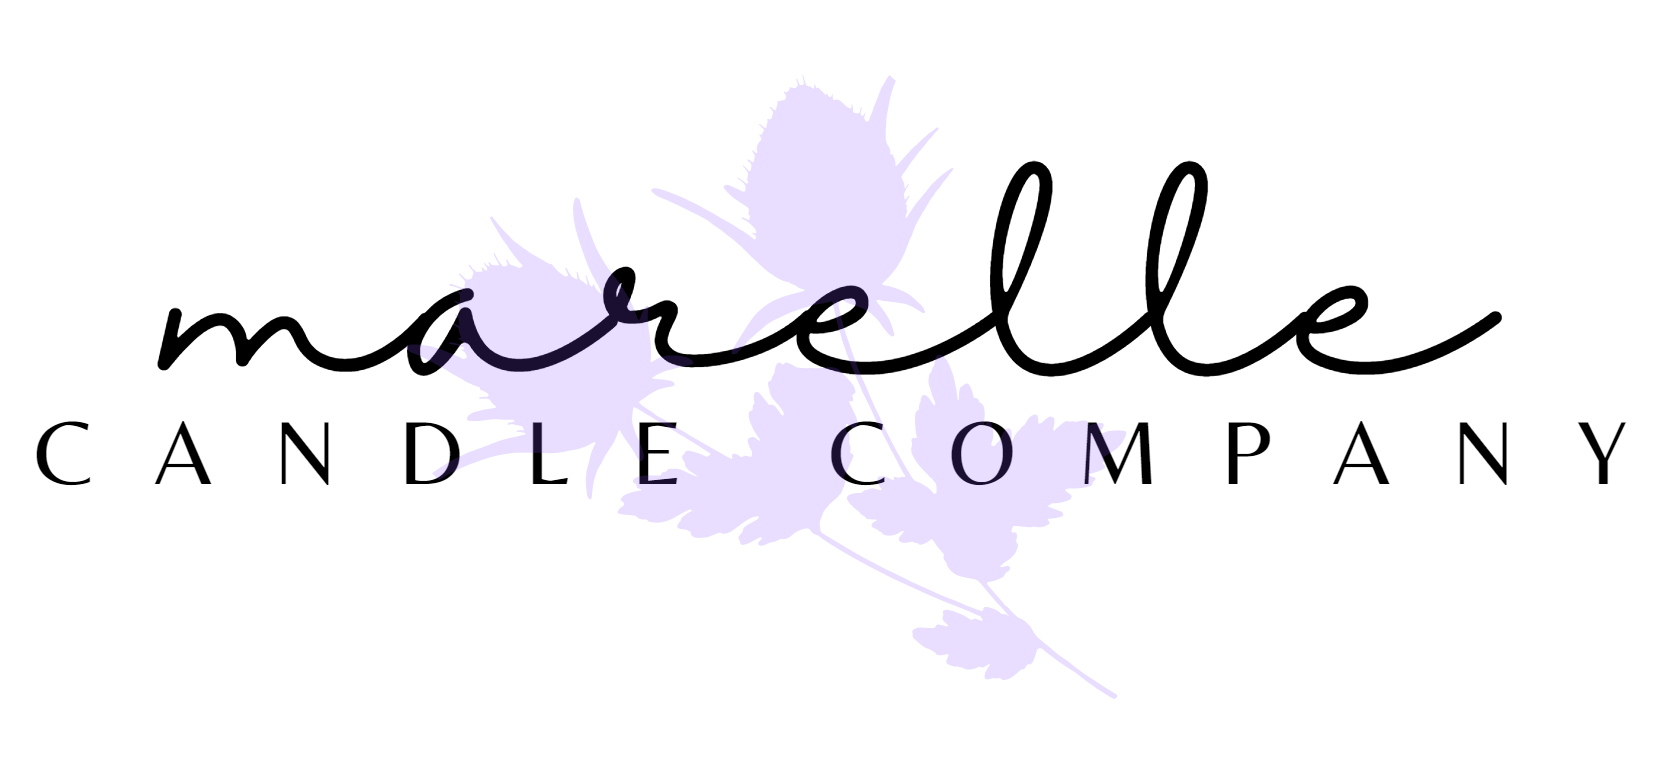 Marelle Candle Company